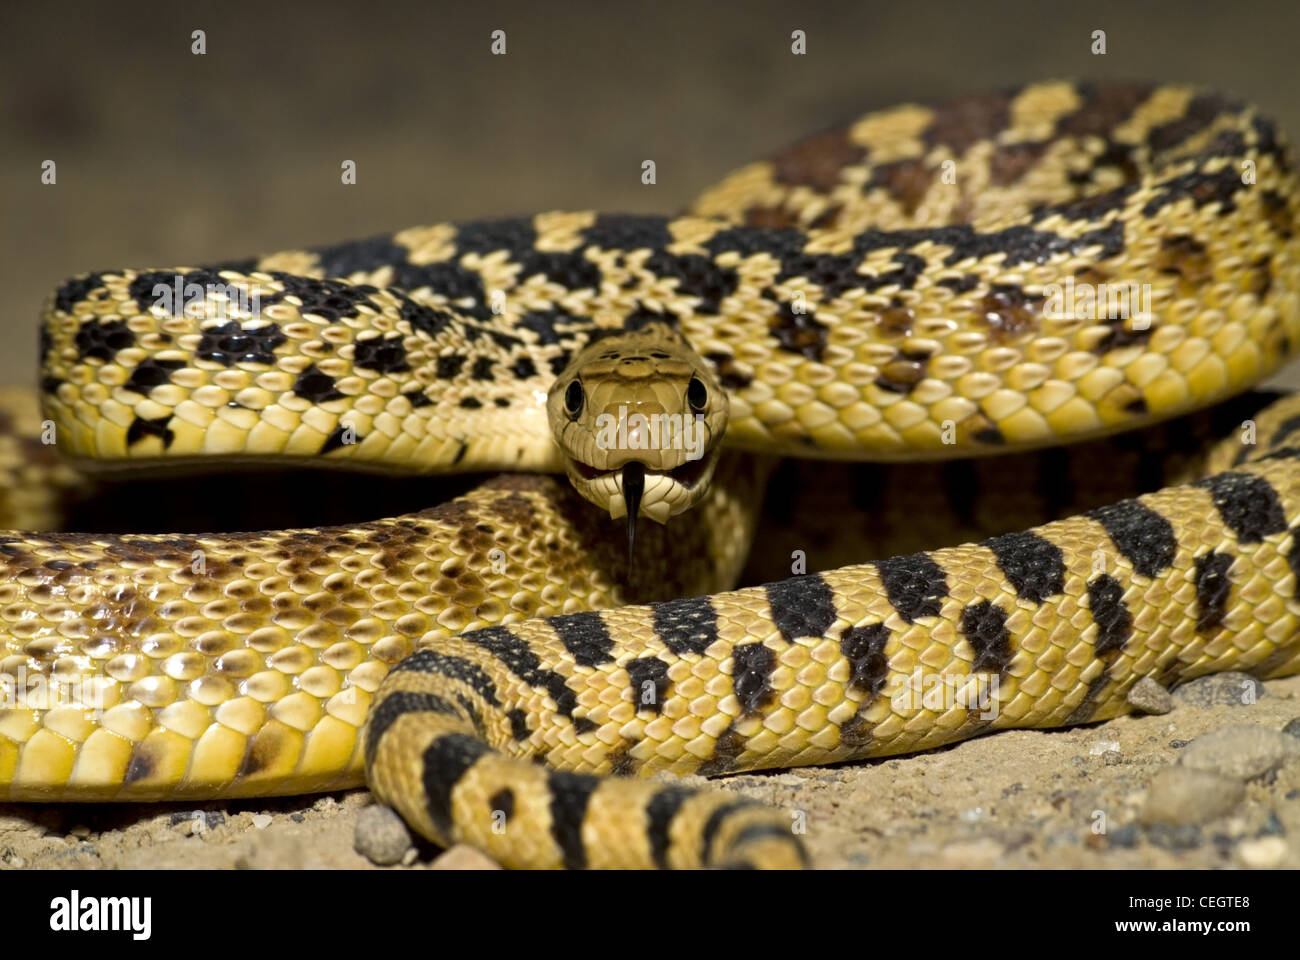 Sonora Gopher Snake, (Pituophis Catenifer Affinis), Ojito Wildnis, Sandoval County, New Mexico, USA. Stockfoto